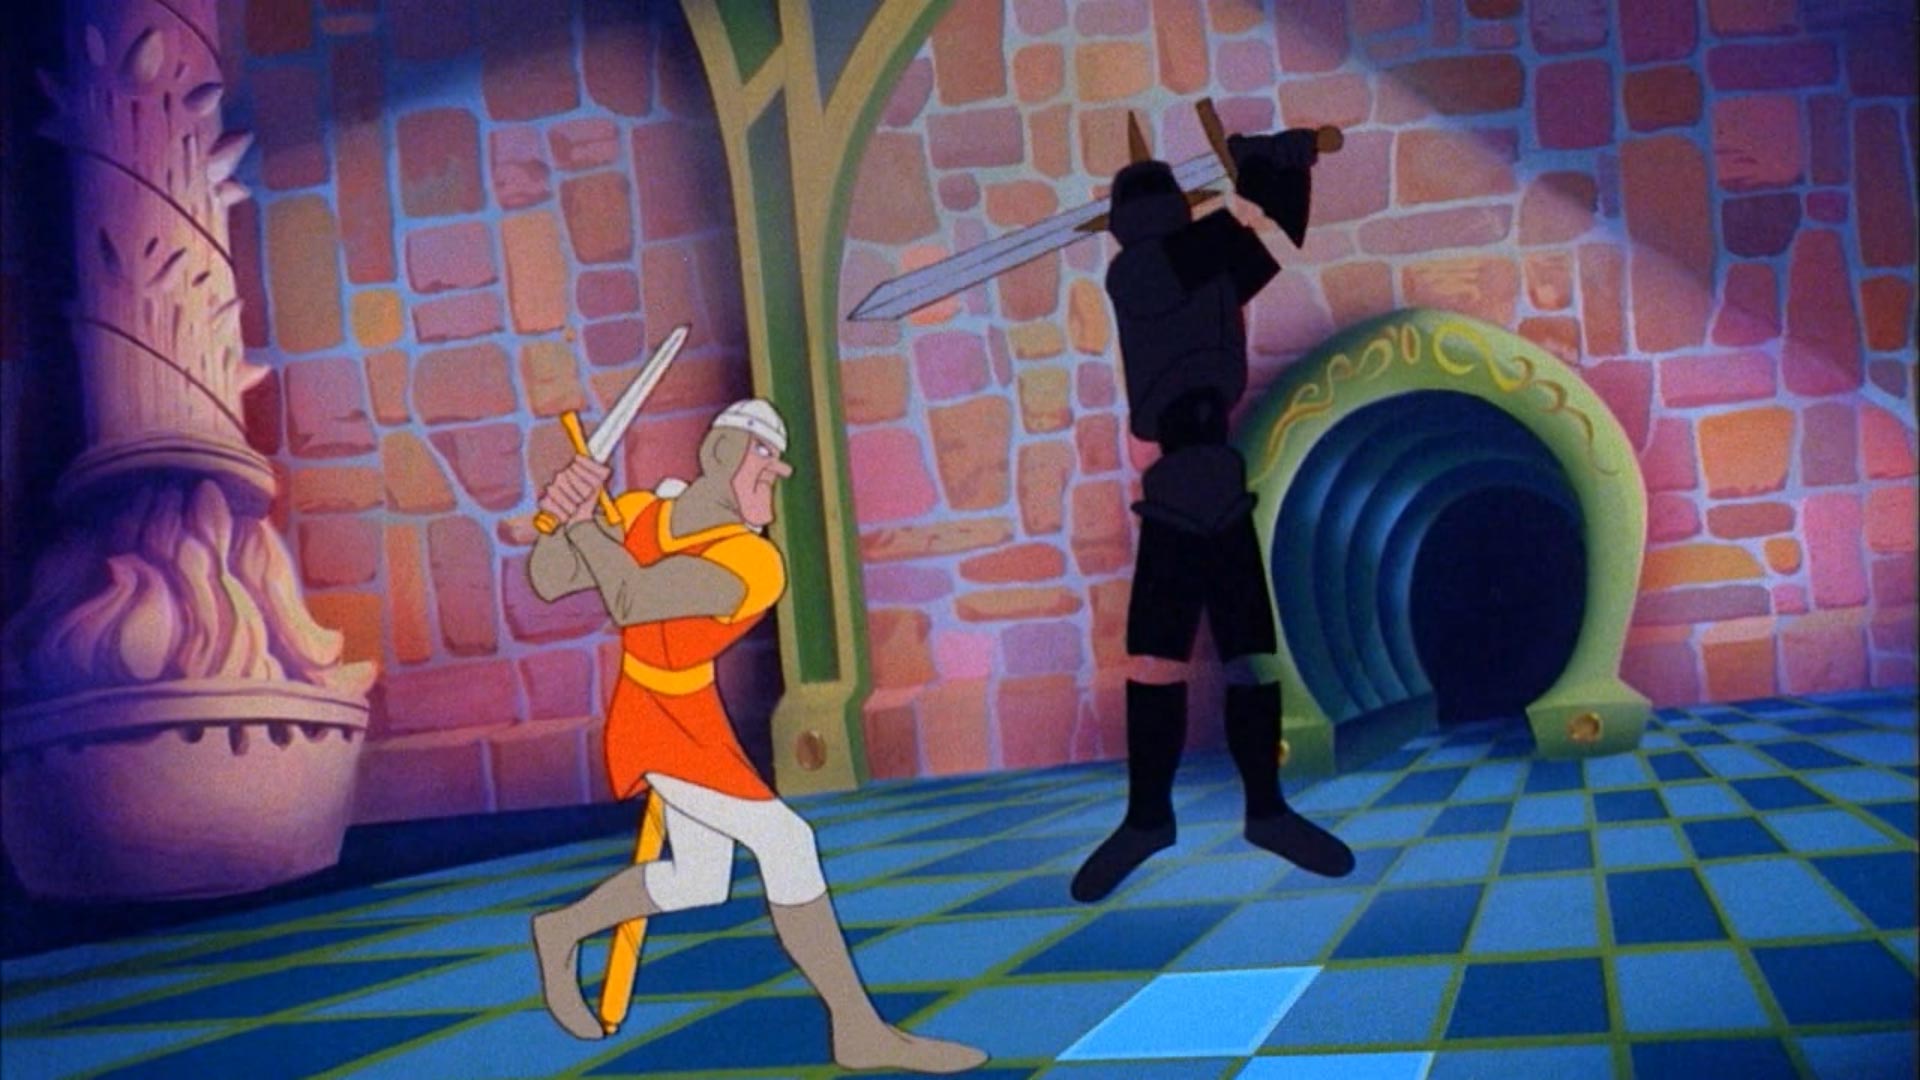 Dragon's Lair. Information, Resources, Image and Material from the Classic Arcade Game